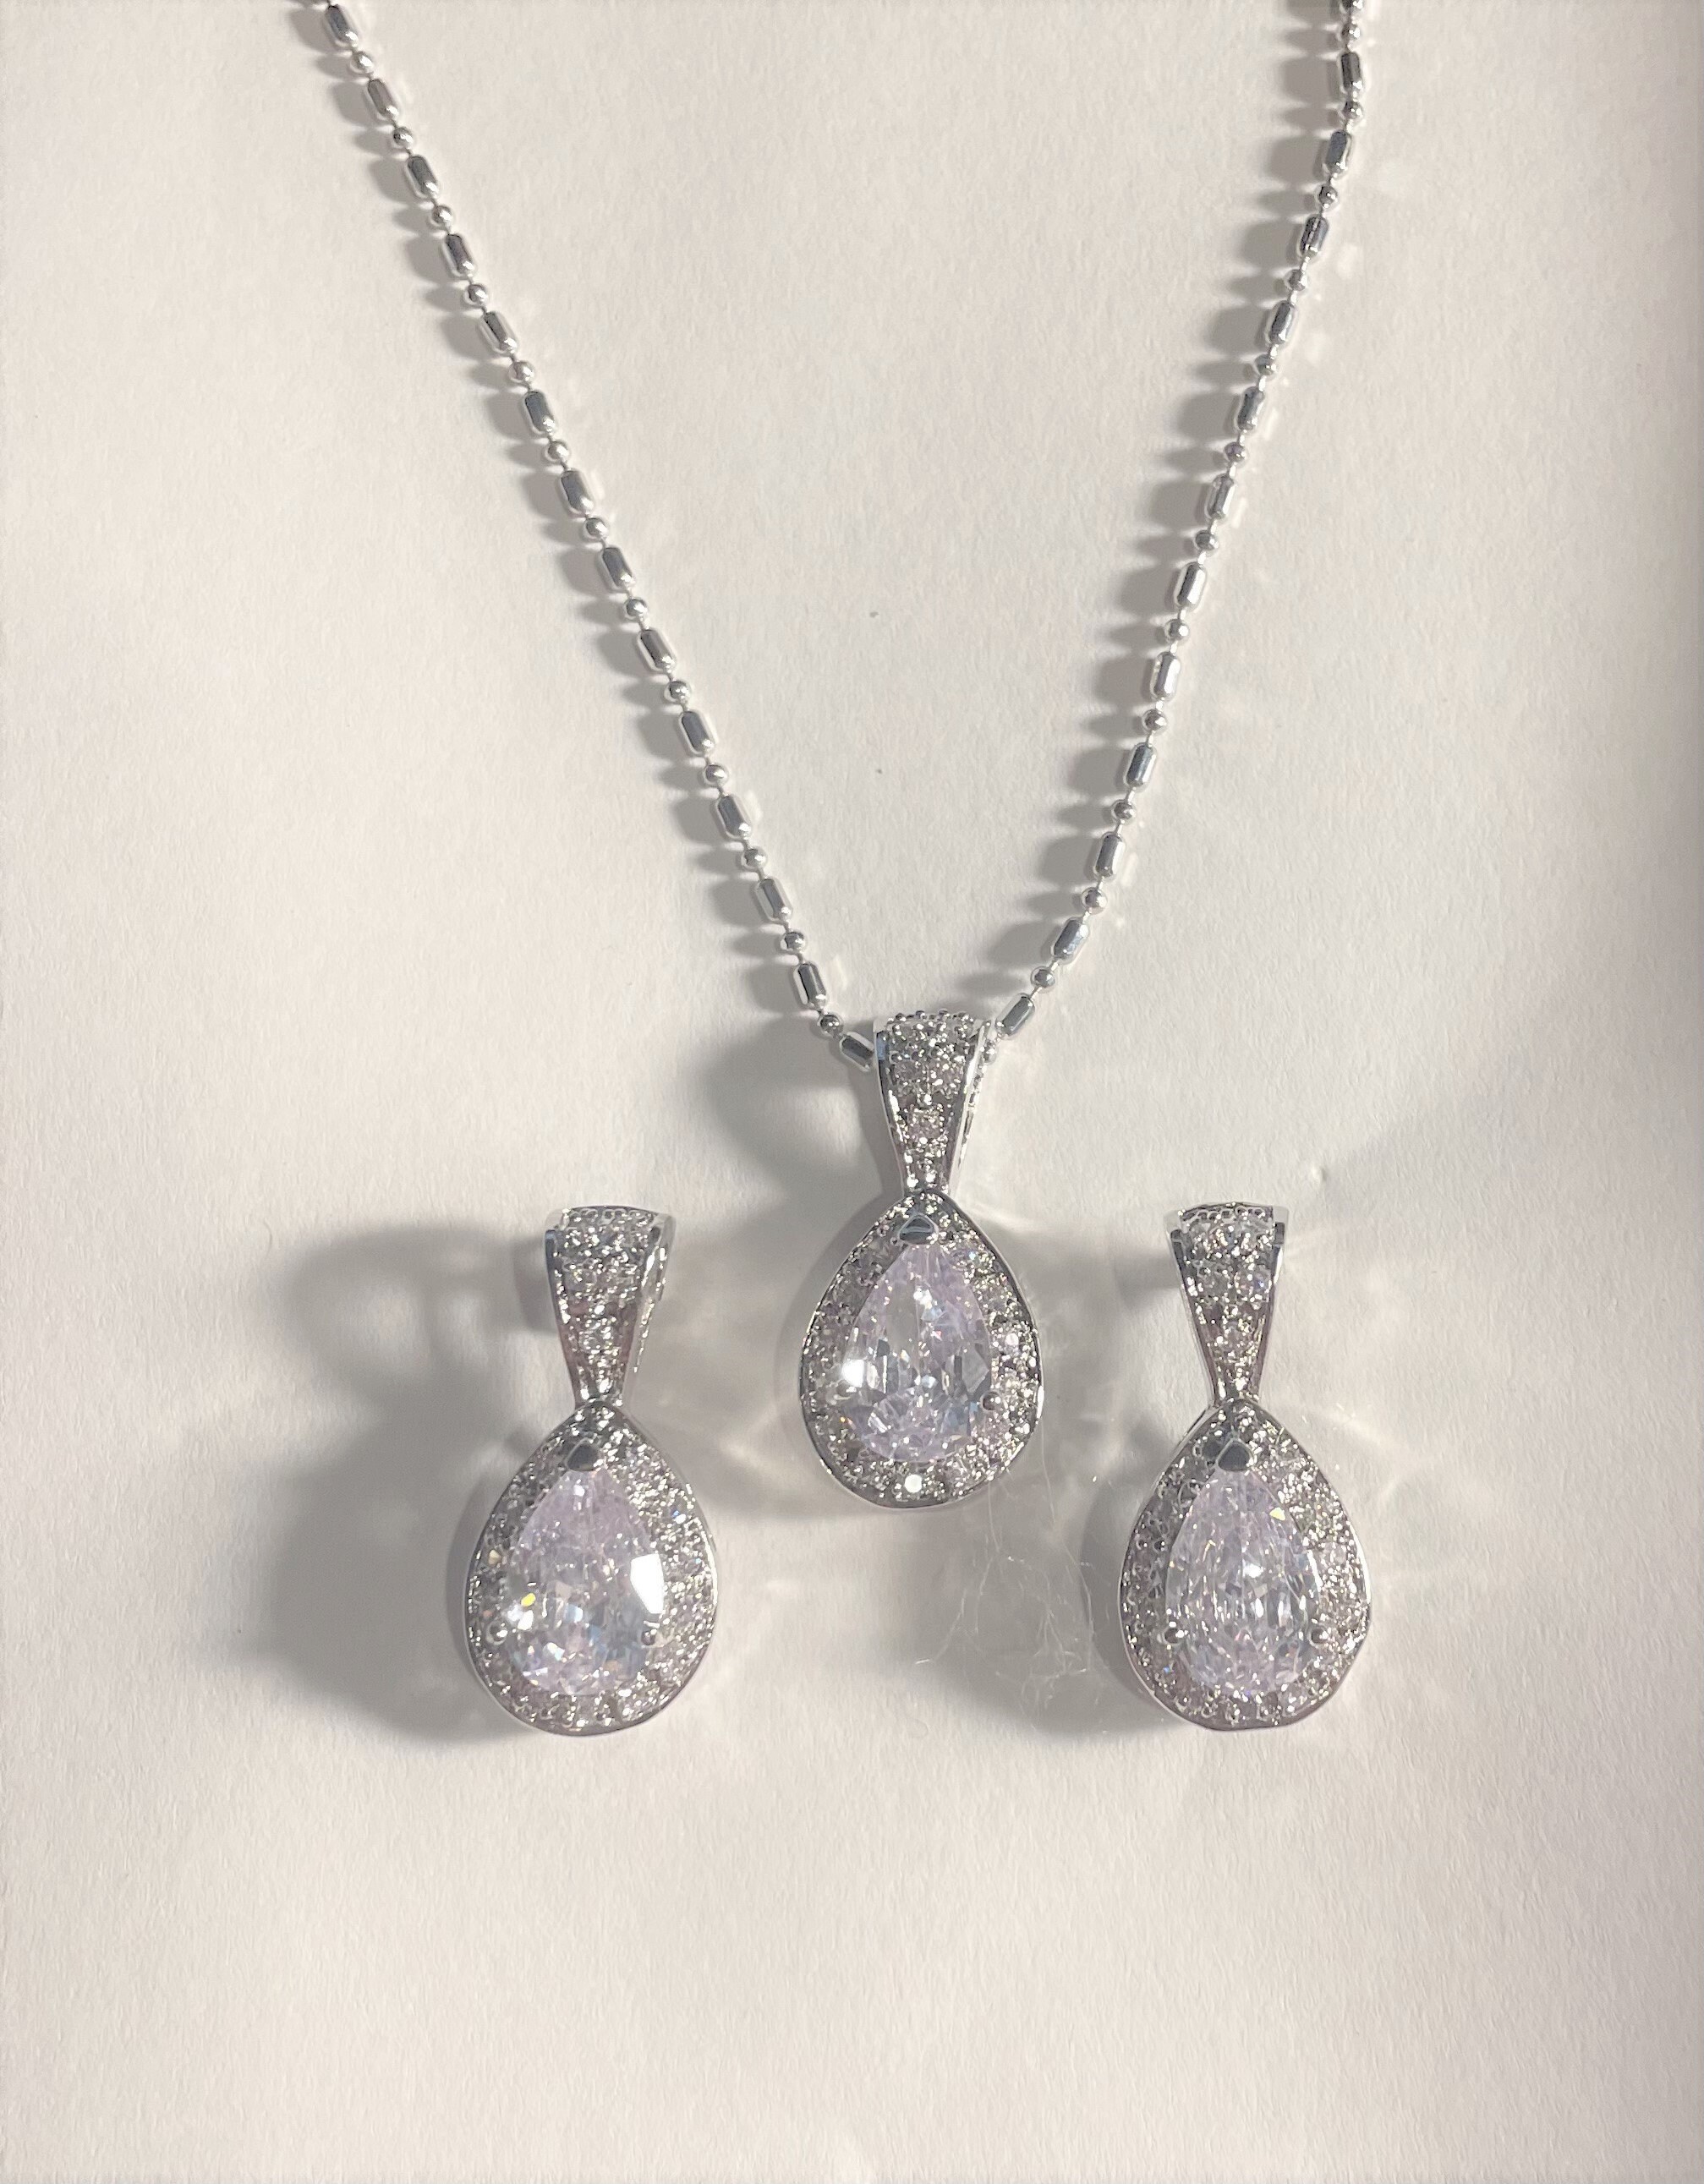 SPECIAL OCCASION BRIDAL PEAR SHAPE CUBIC ZIRCONIA PENDANT NECKLACE & EARRING SET 